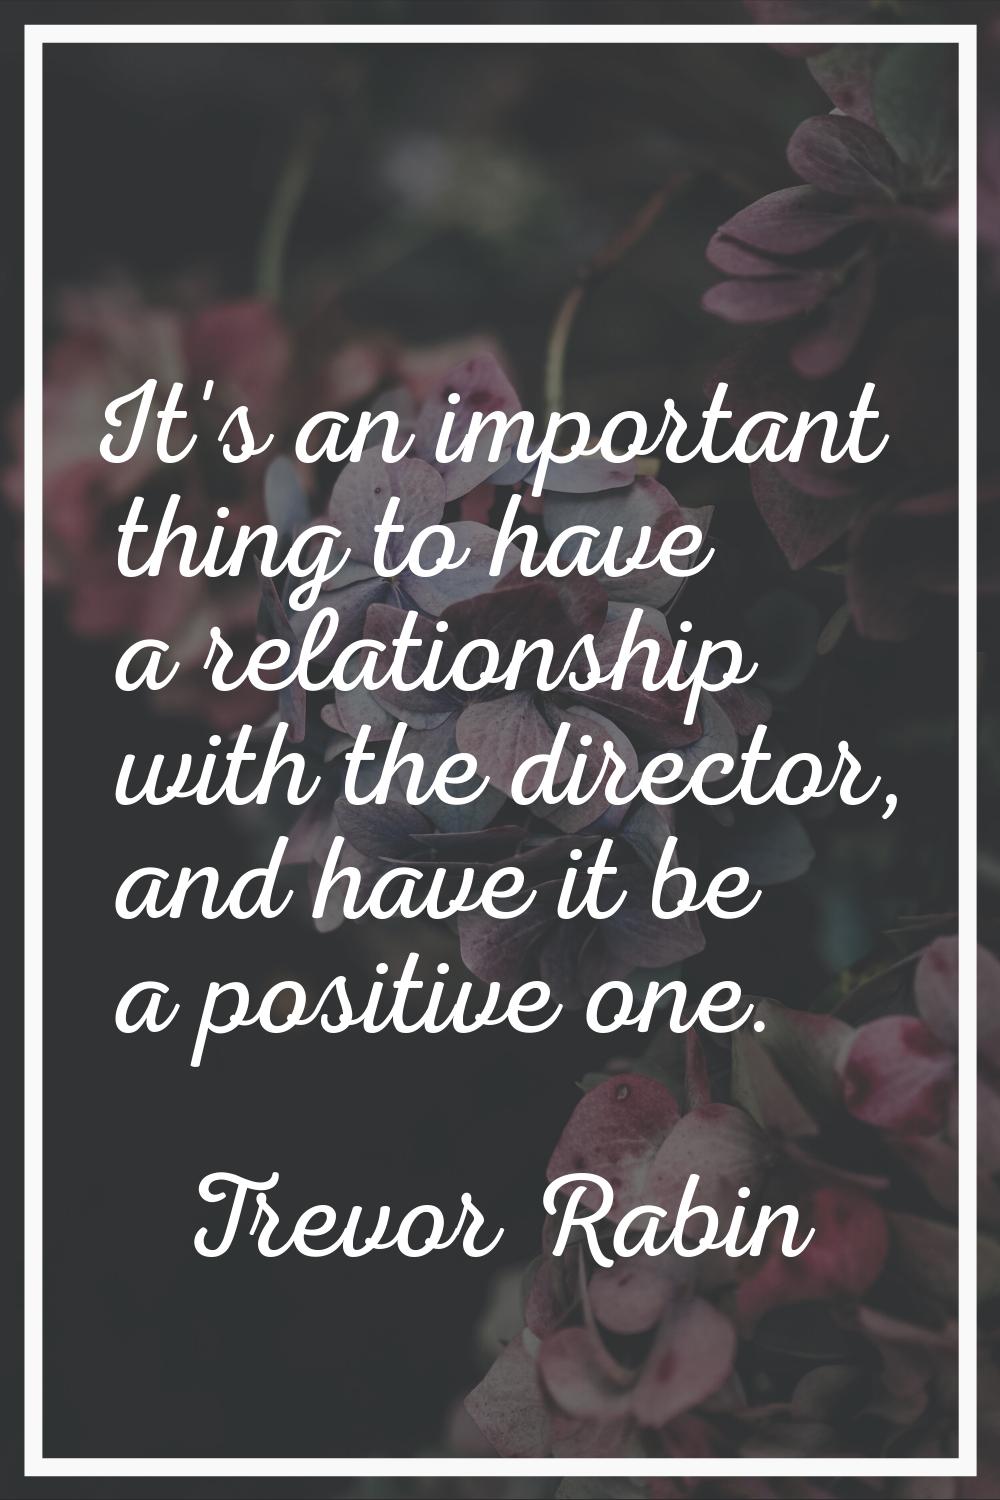 It's an important thing to have a relationship with the director, and have it be a positive one.